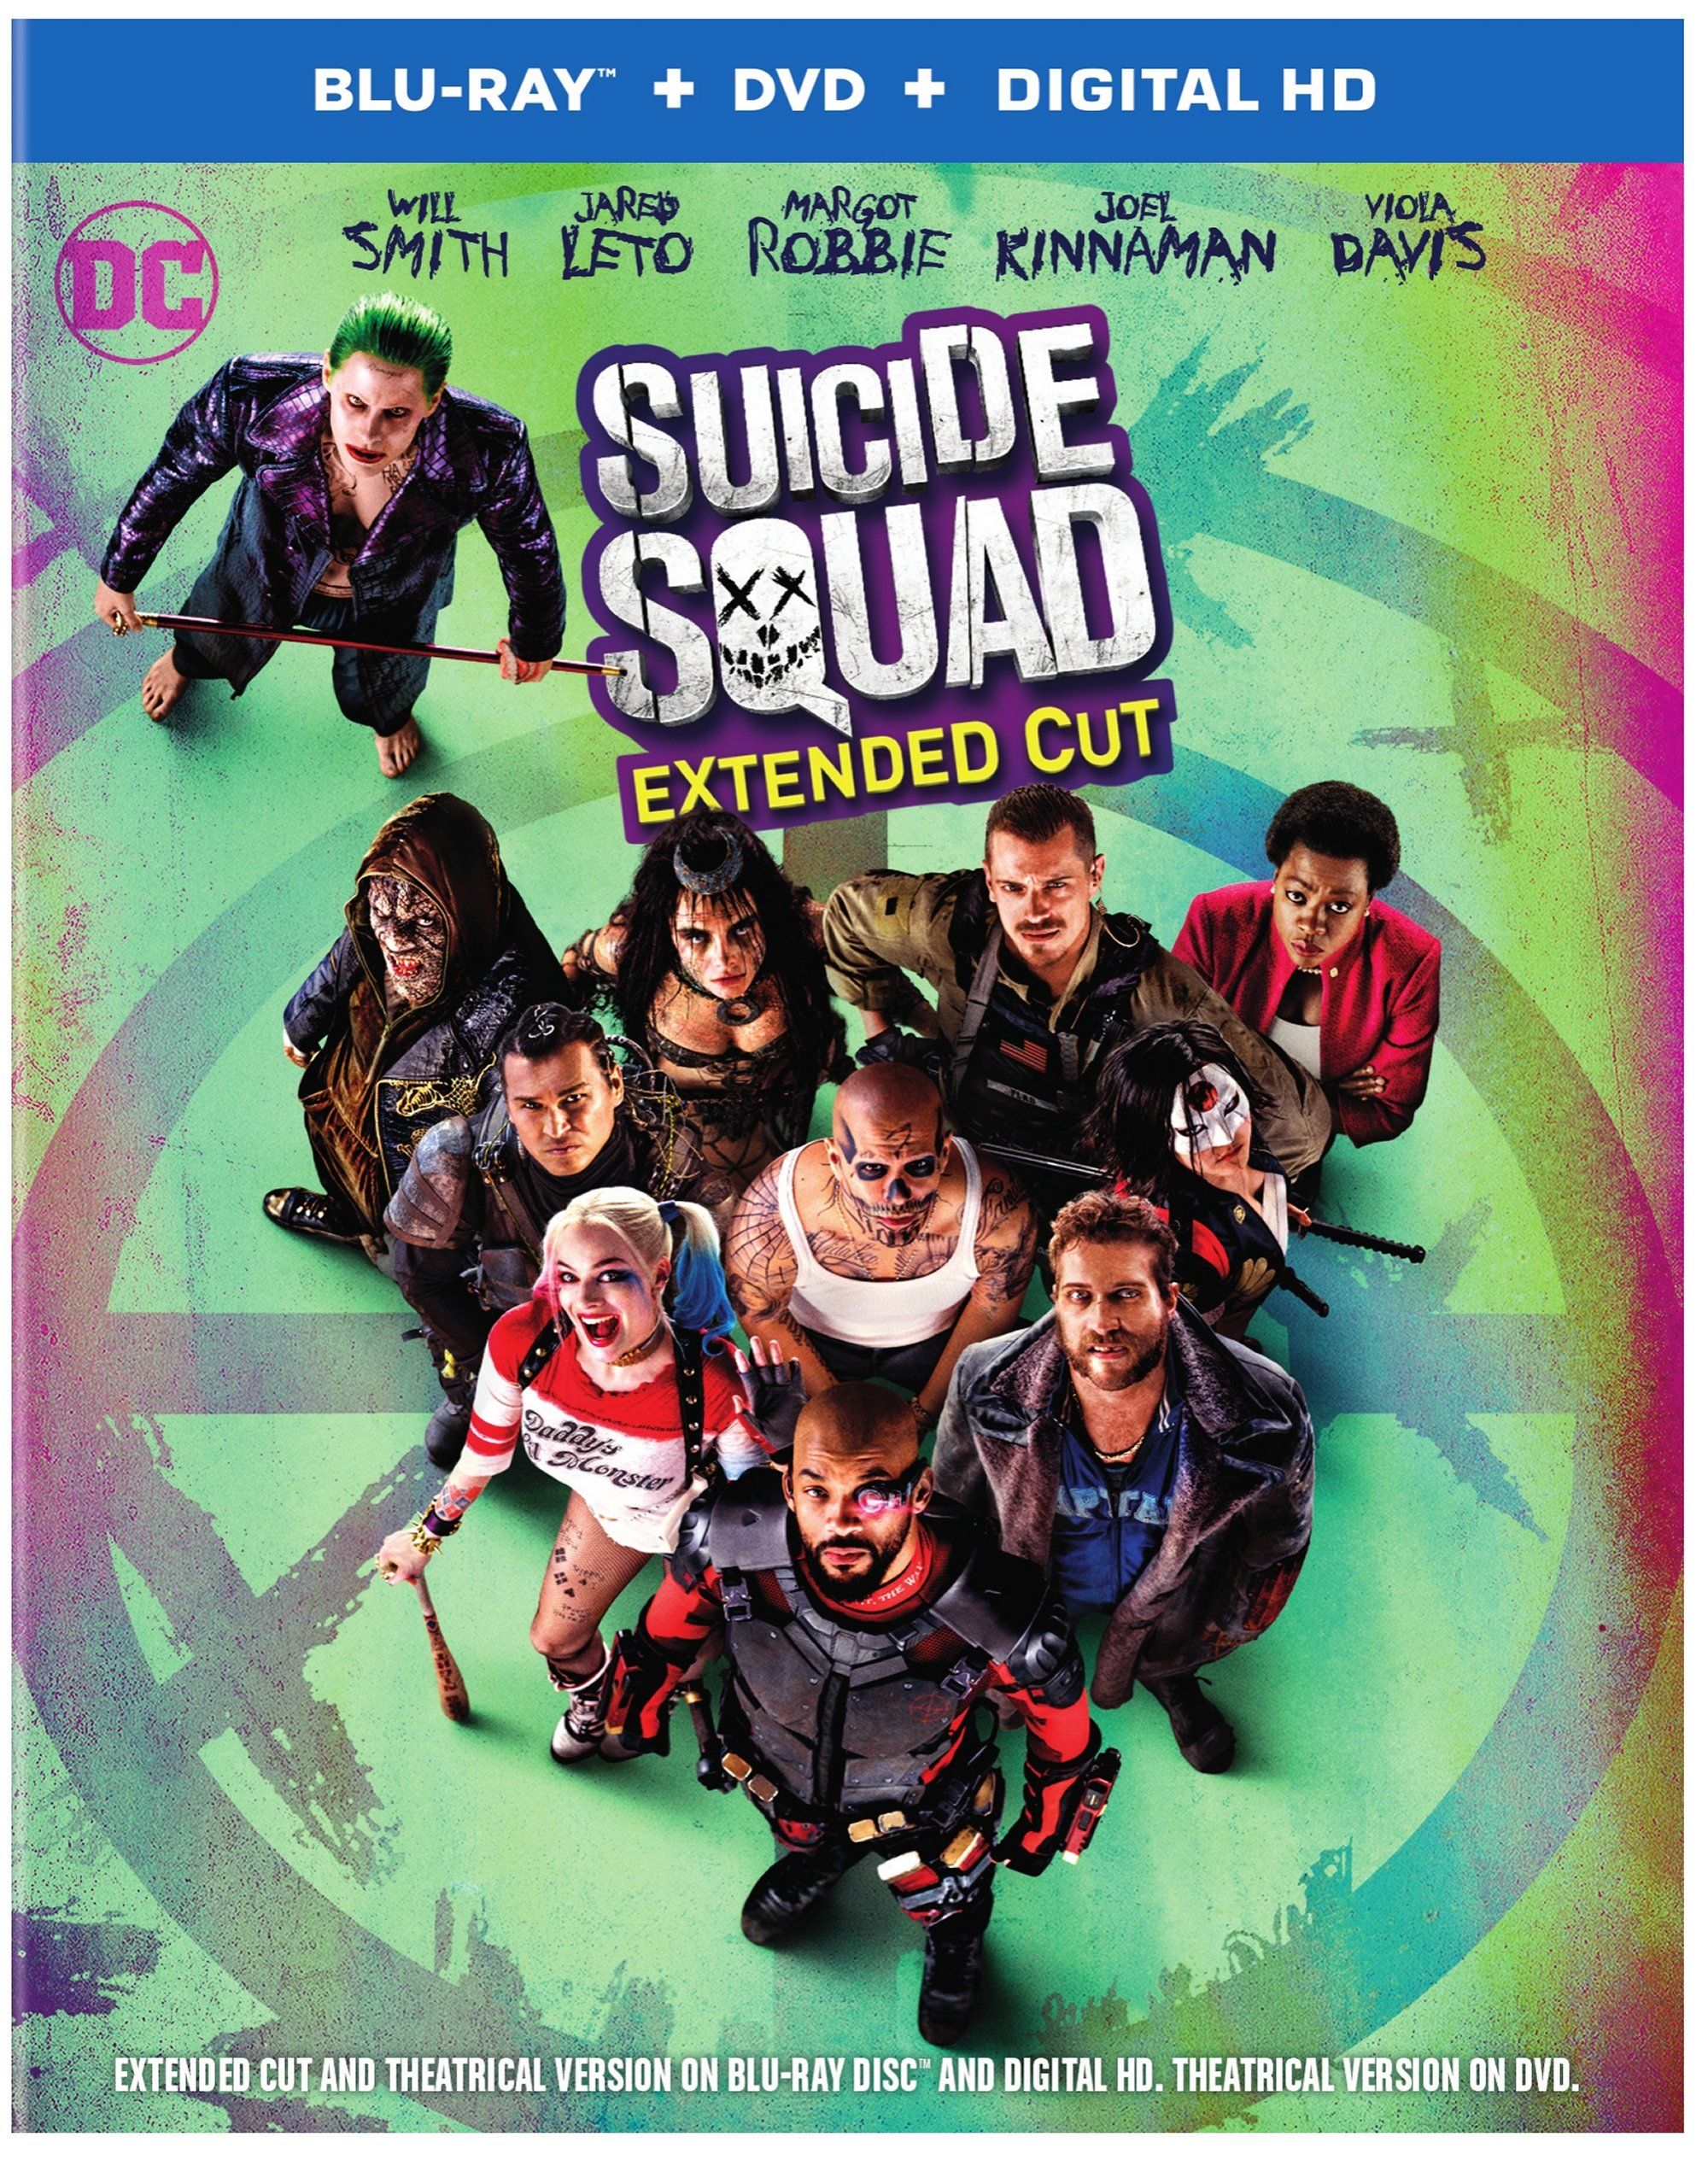 http://cdn.collider.com/wp-content/uploads/2016/10/suicide-squad-blu-ray-cover.jpeg